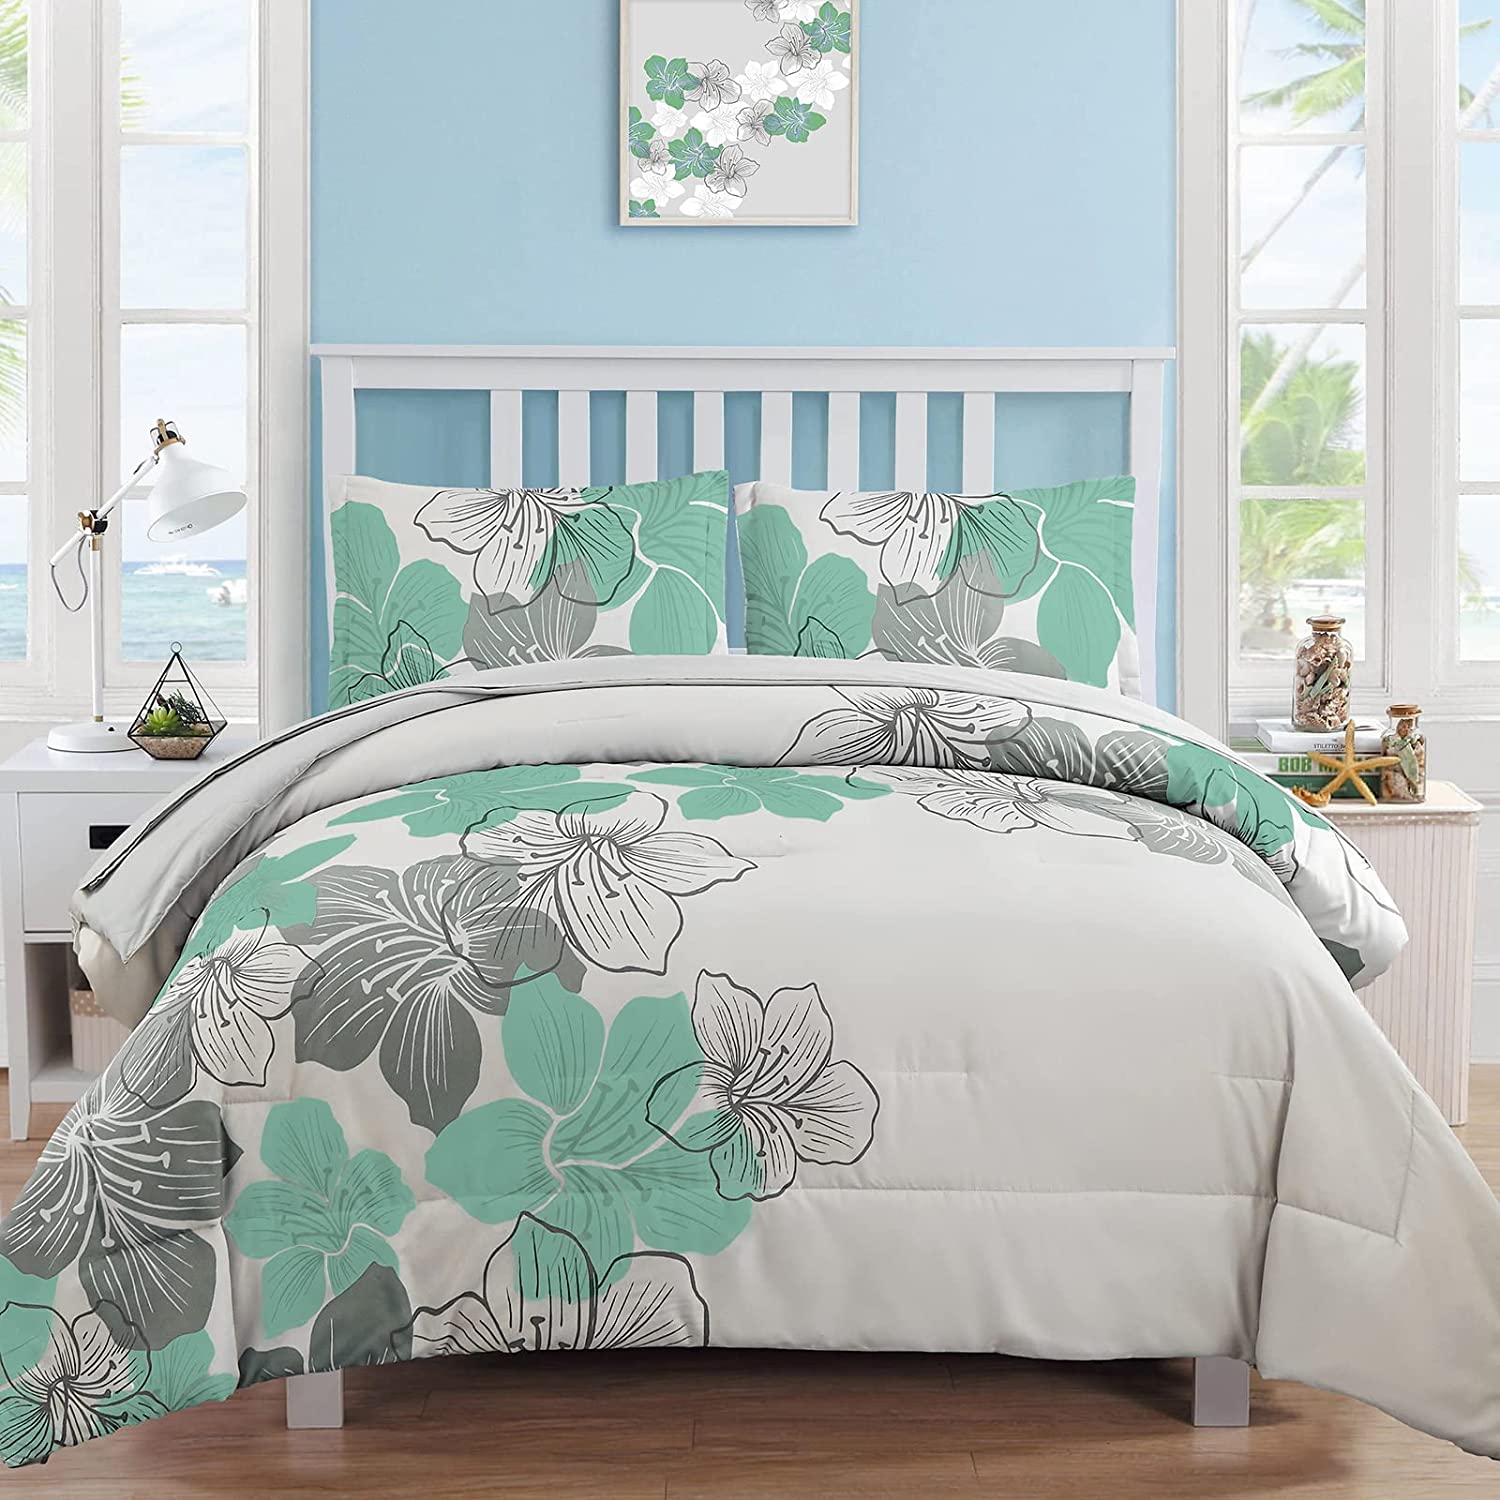 Green Floral Comforter Set Queen - Mint Green Floral Pattern Printed on Grey